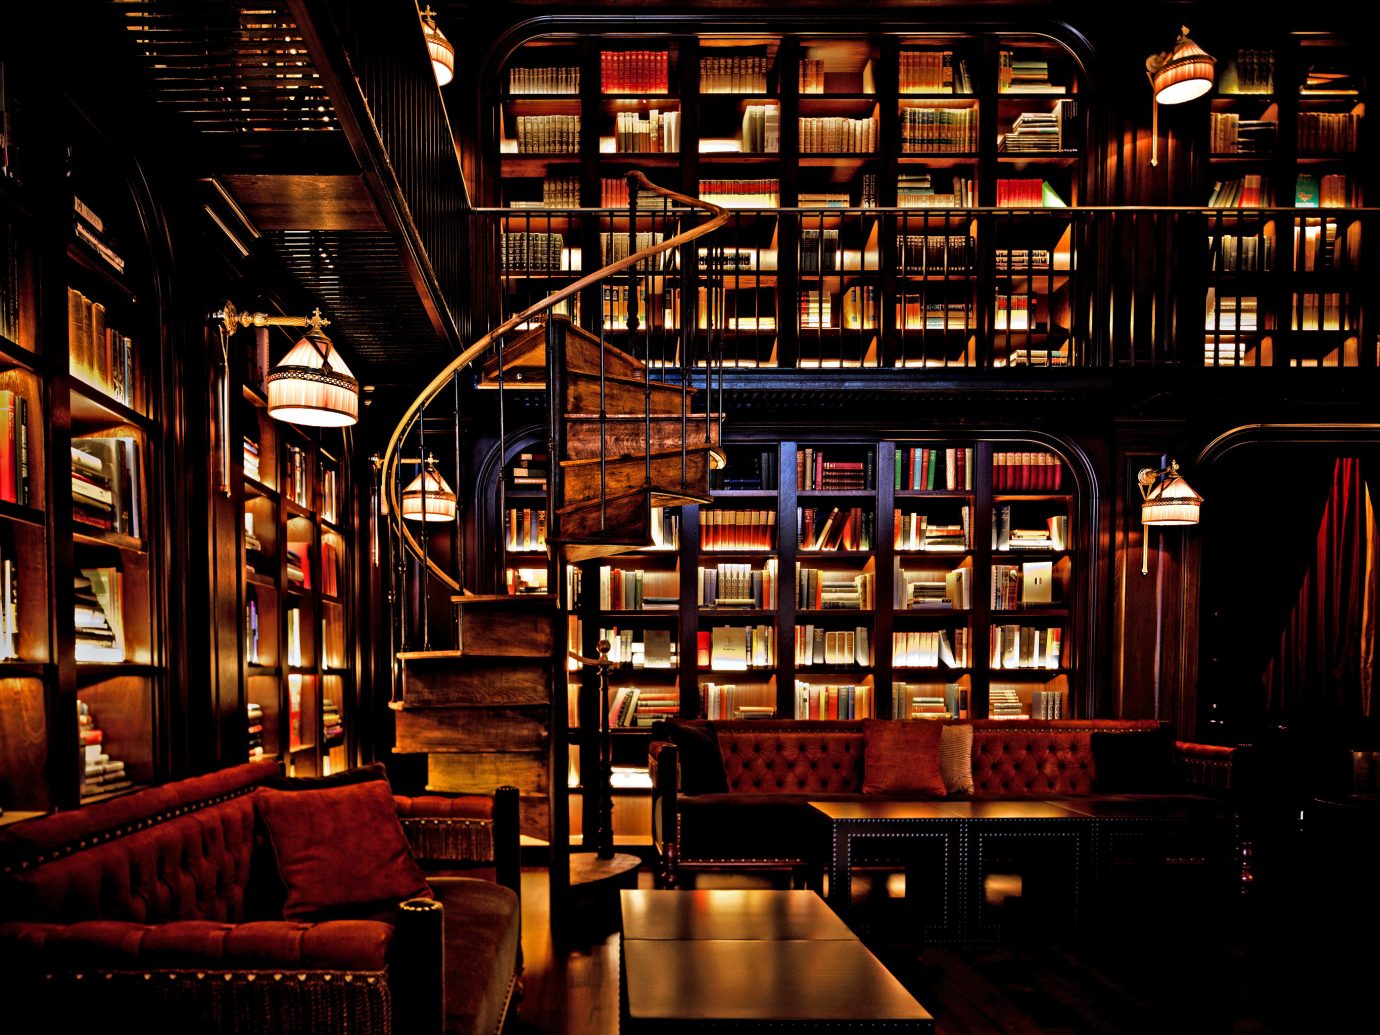 The NoMad Hotel City Hip Hotels Luxury Luxury Travel NYC Romantic Hotels indoor building Bar interior design